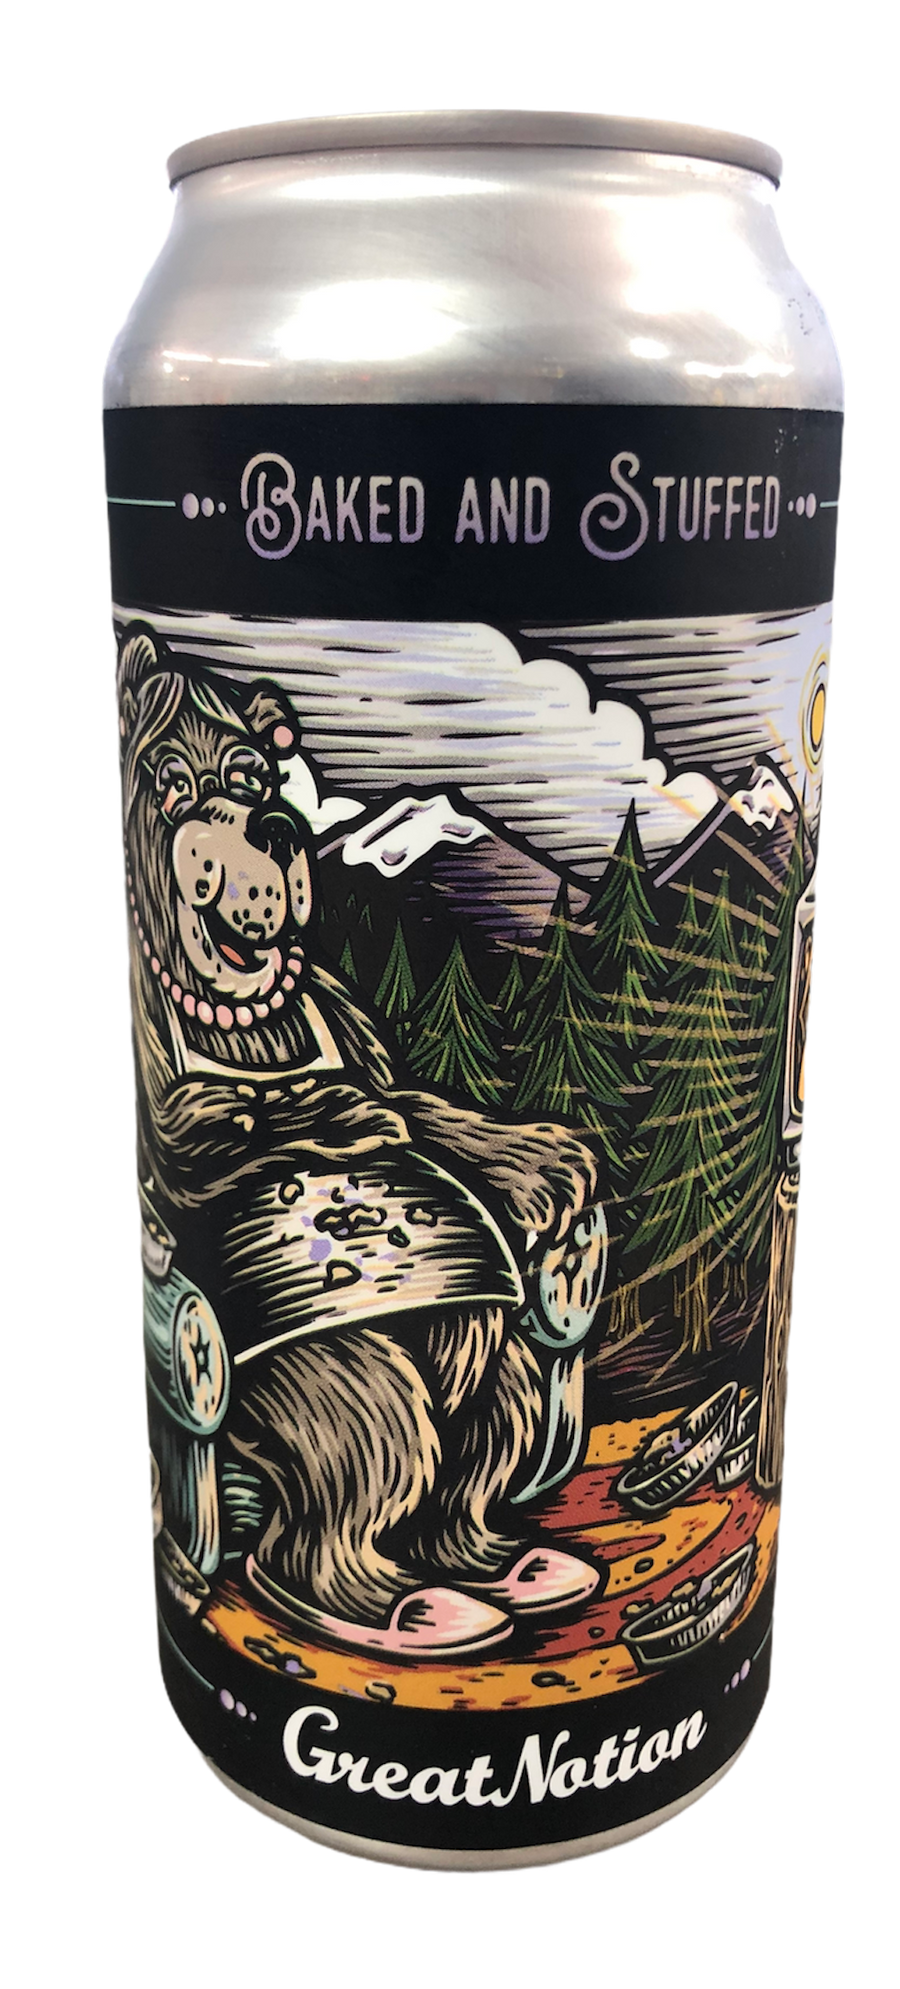 Buy Great Notion Baked and Stuffed Online -Craft City